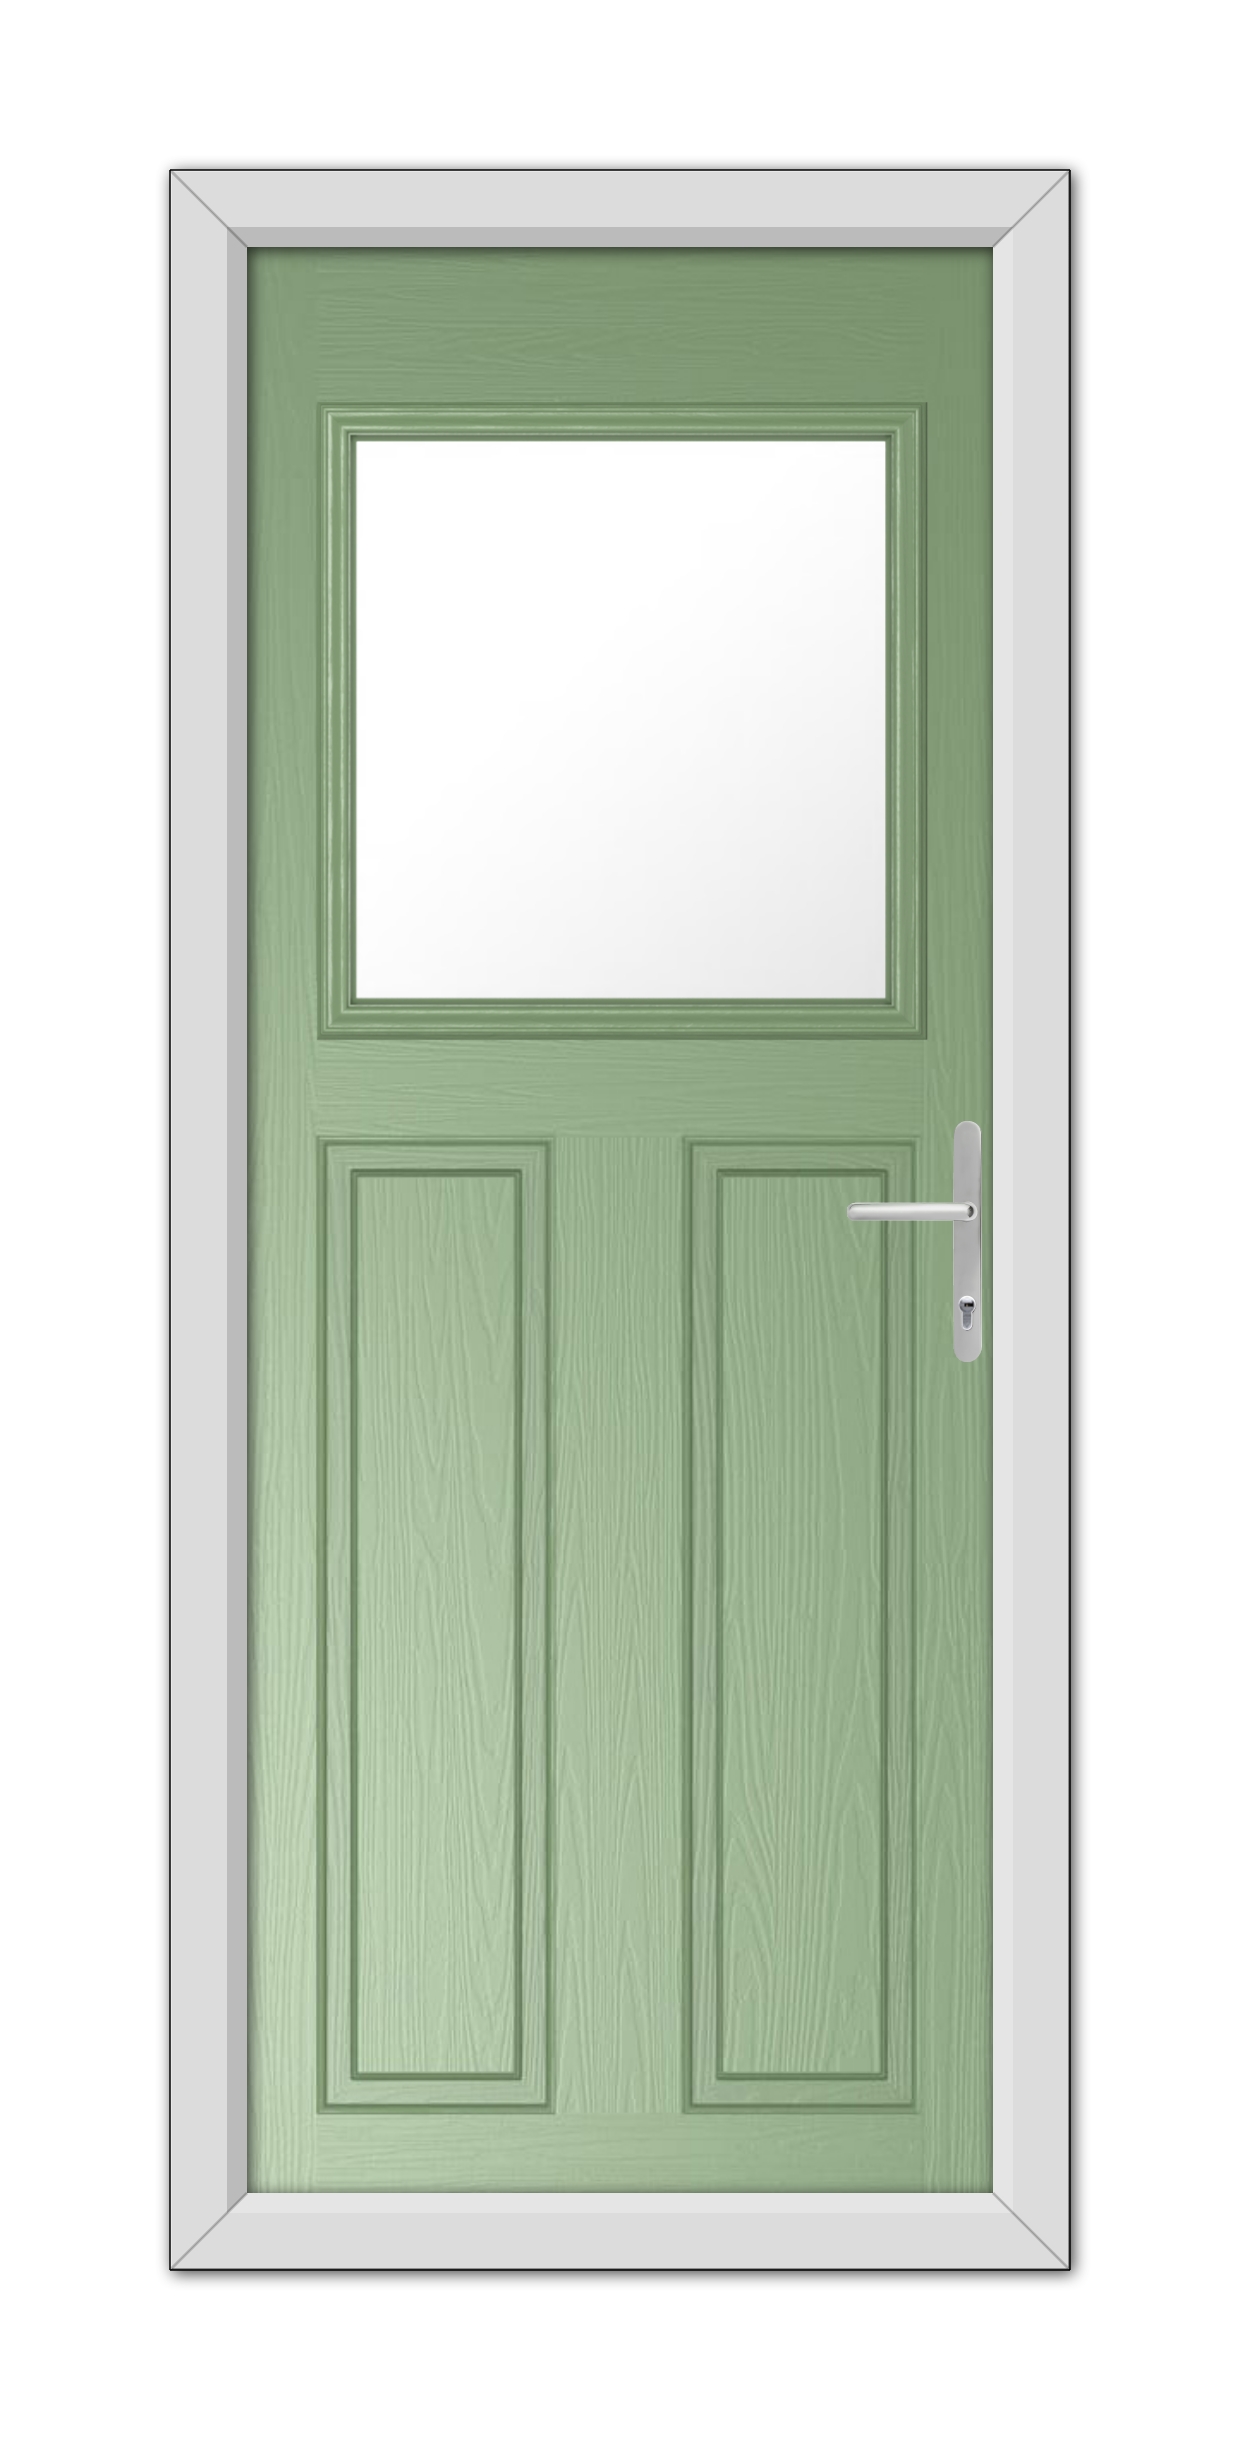 A Chartwell Green Axwell Composite Door 48mm Timber Core with a top window and a metal handle, set within a white frame.